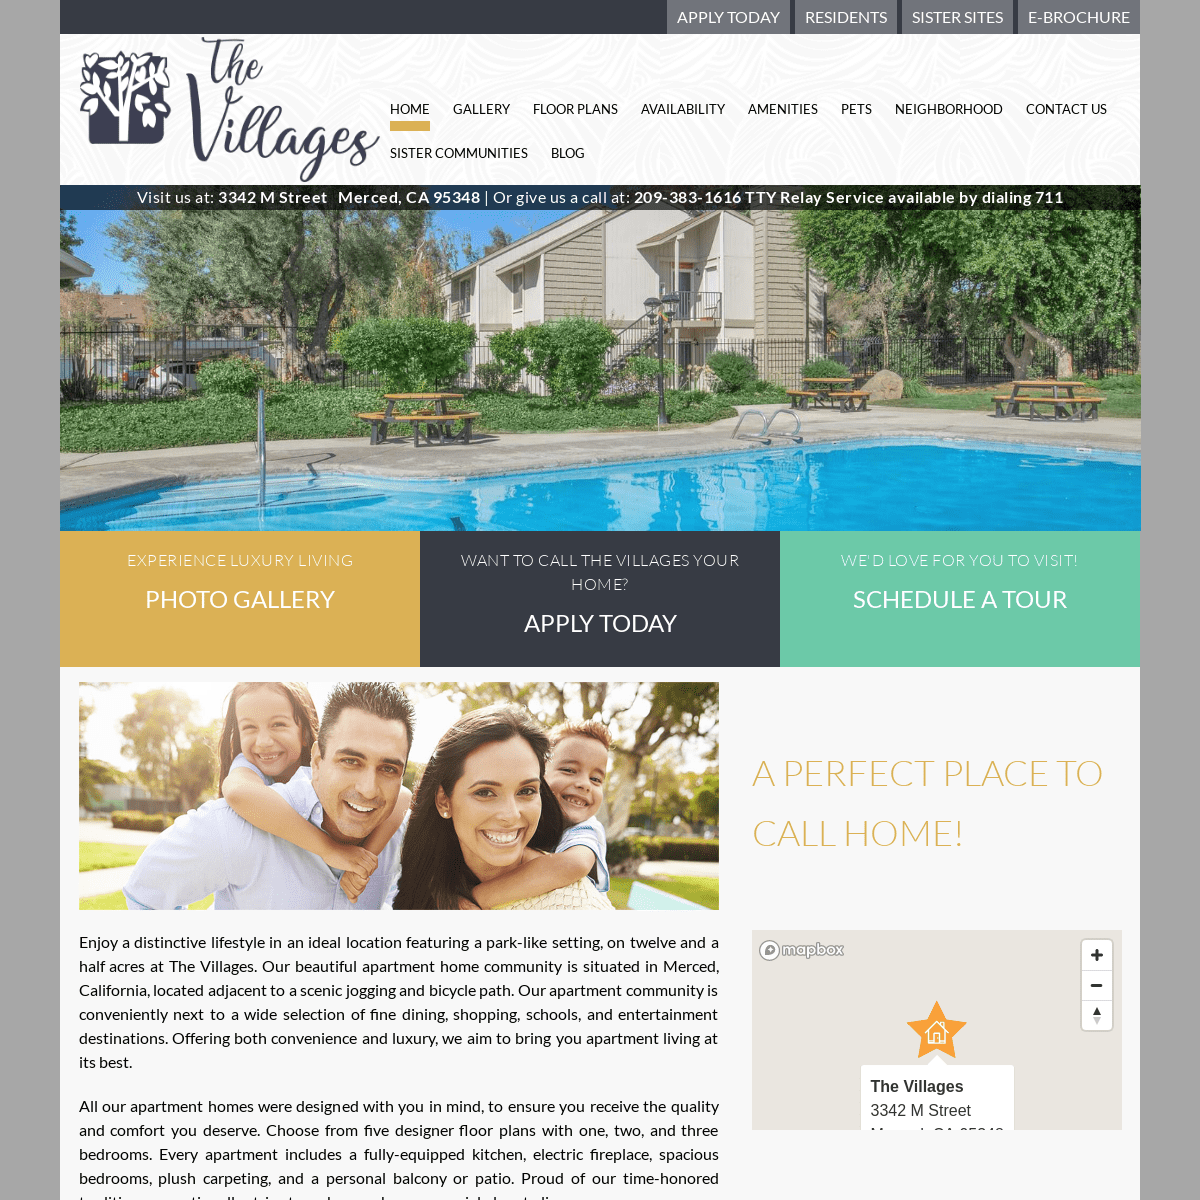 The Villages - Apartments in Merced, CA